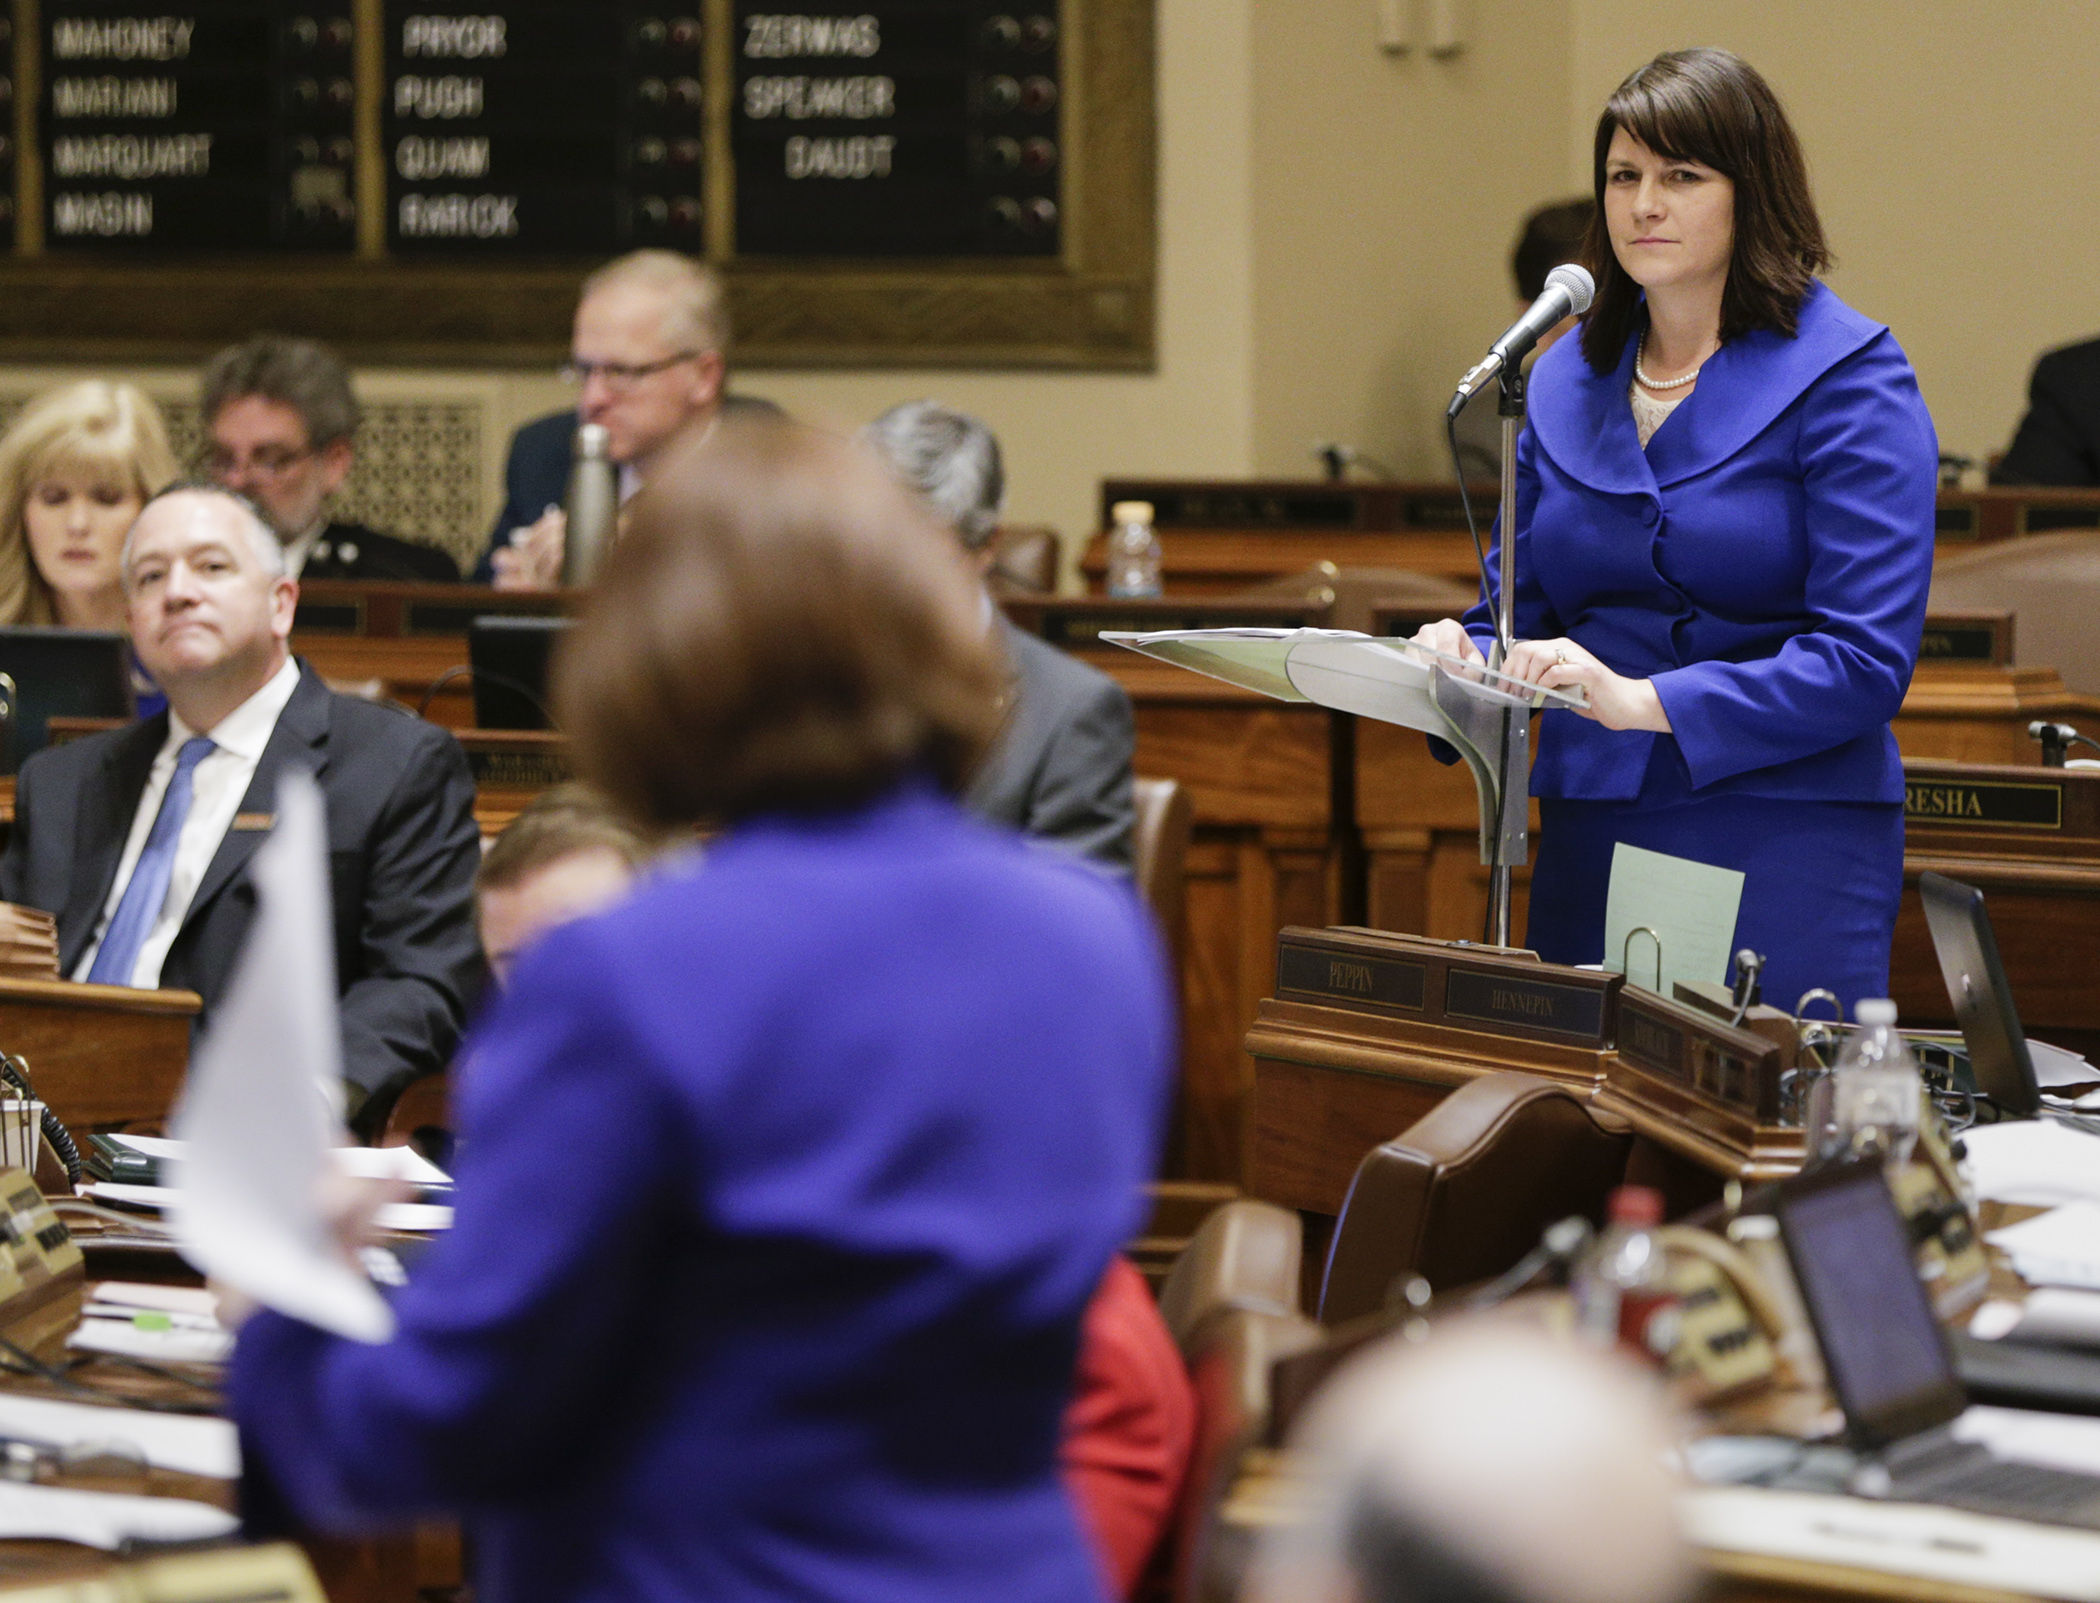 Majority Leader Joyce Peppin, right, listens as Rep. Tina Liebling discusses one of her amendments to the Permanent House Rules during debate on the House Floor Feb. 16. Photo by Paul Battaglia